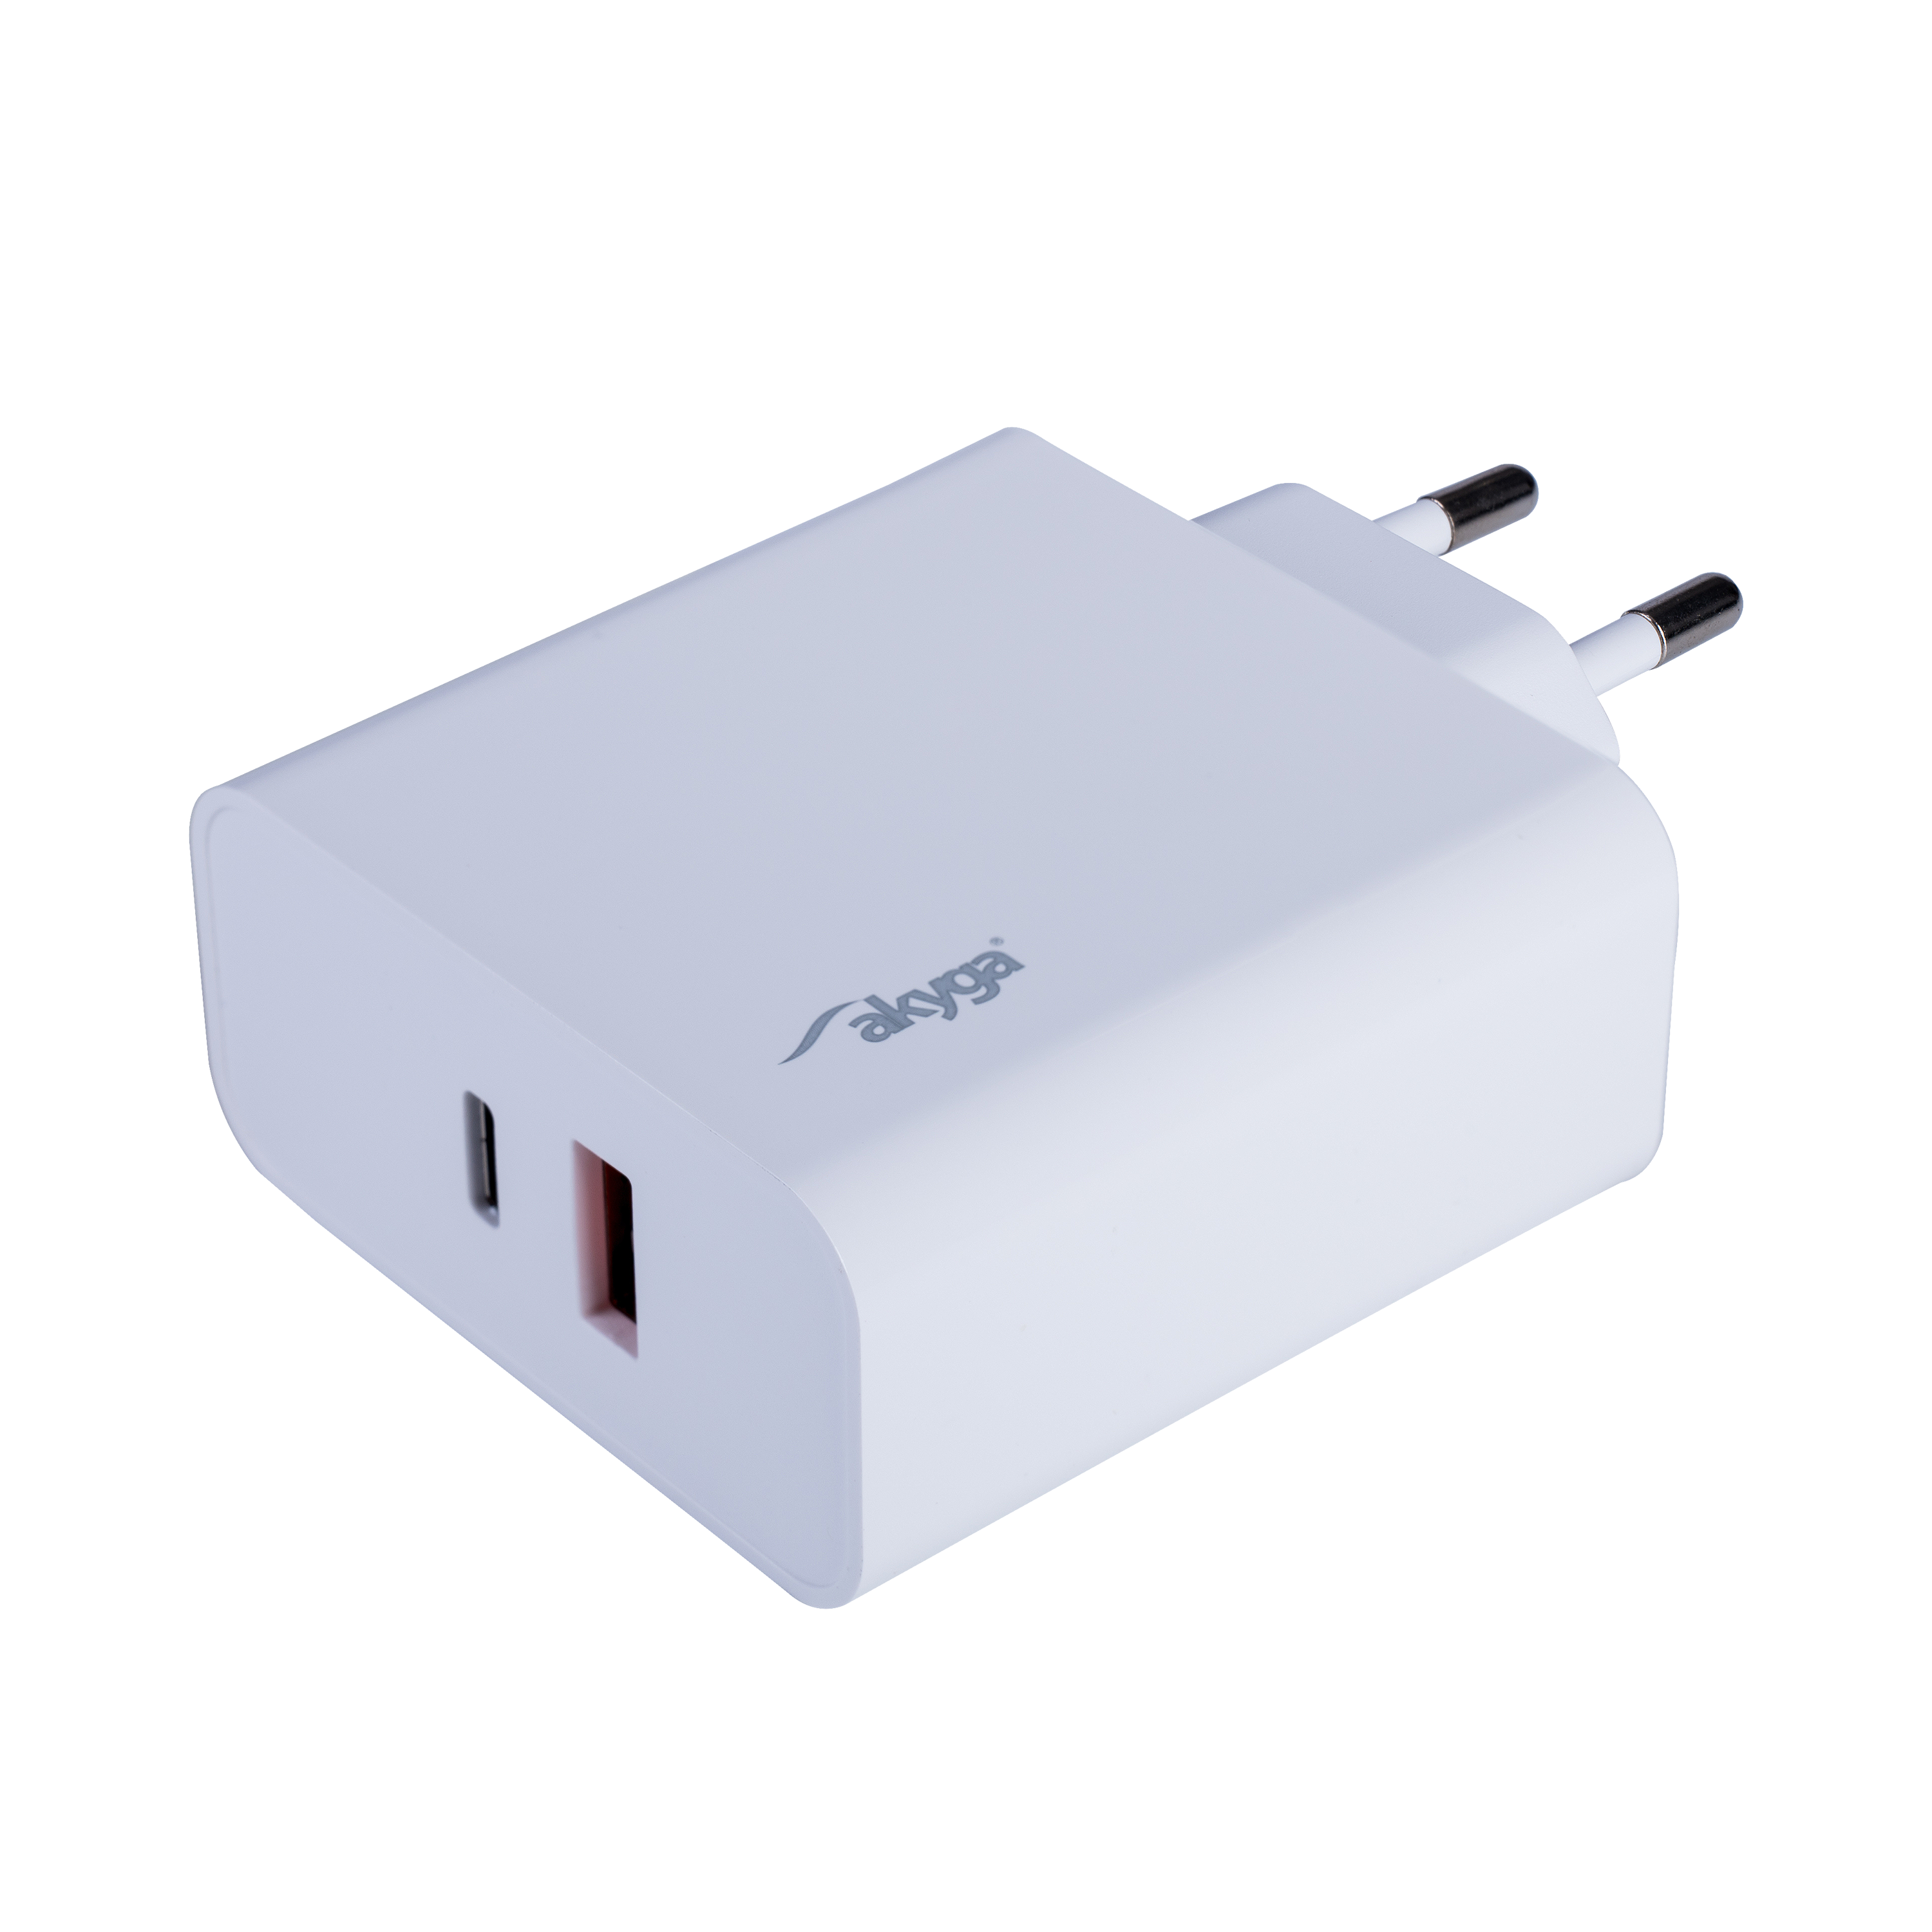 USB Charger AK-CH-15 USB-A + USB-C PD 5-20V / max. 3.25A 65W Quick Charge  3.0